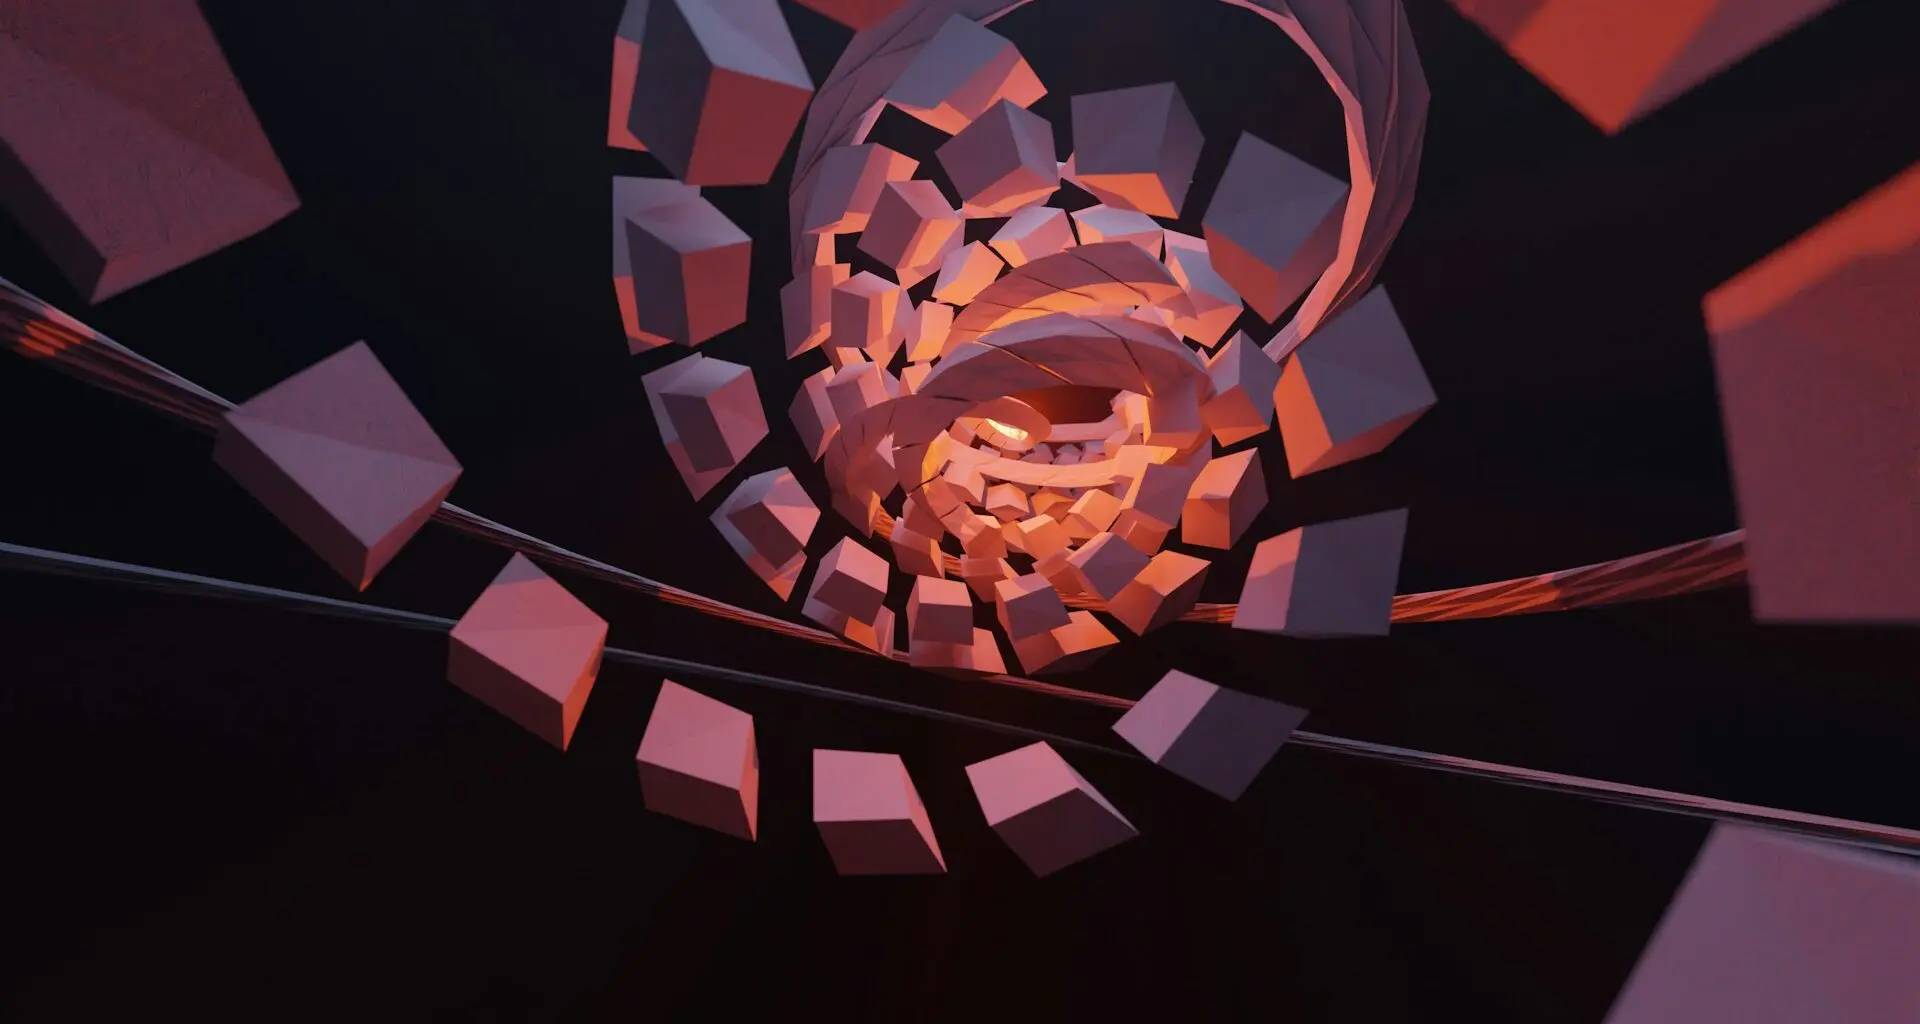 A 3D model of a spiral staircase made of interconnected blocks, resembling a blockchain. The dark, enclosed space could represent the secure nature of blockchain technology and cybersecurity.